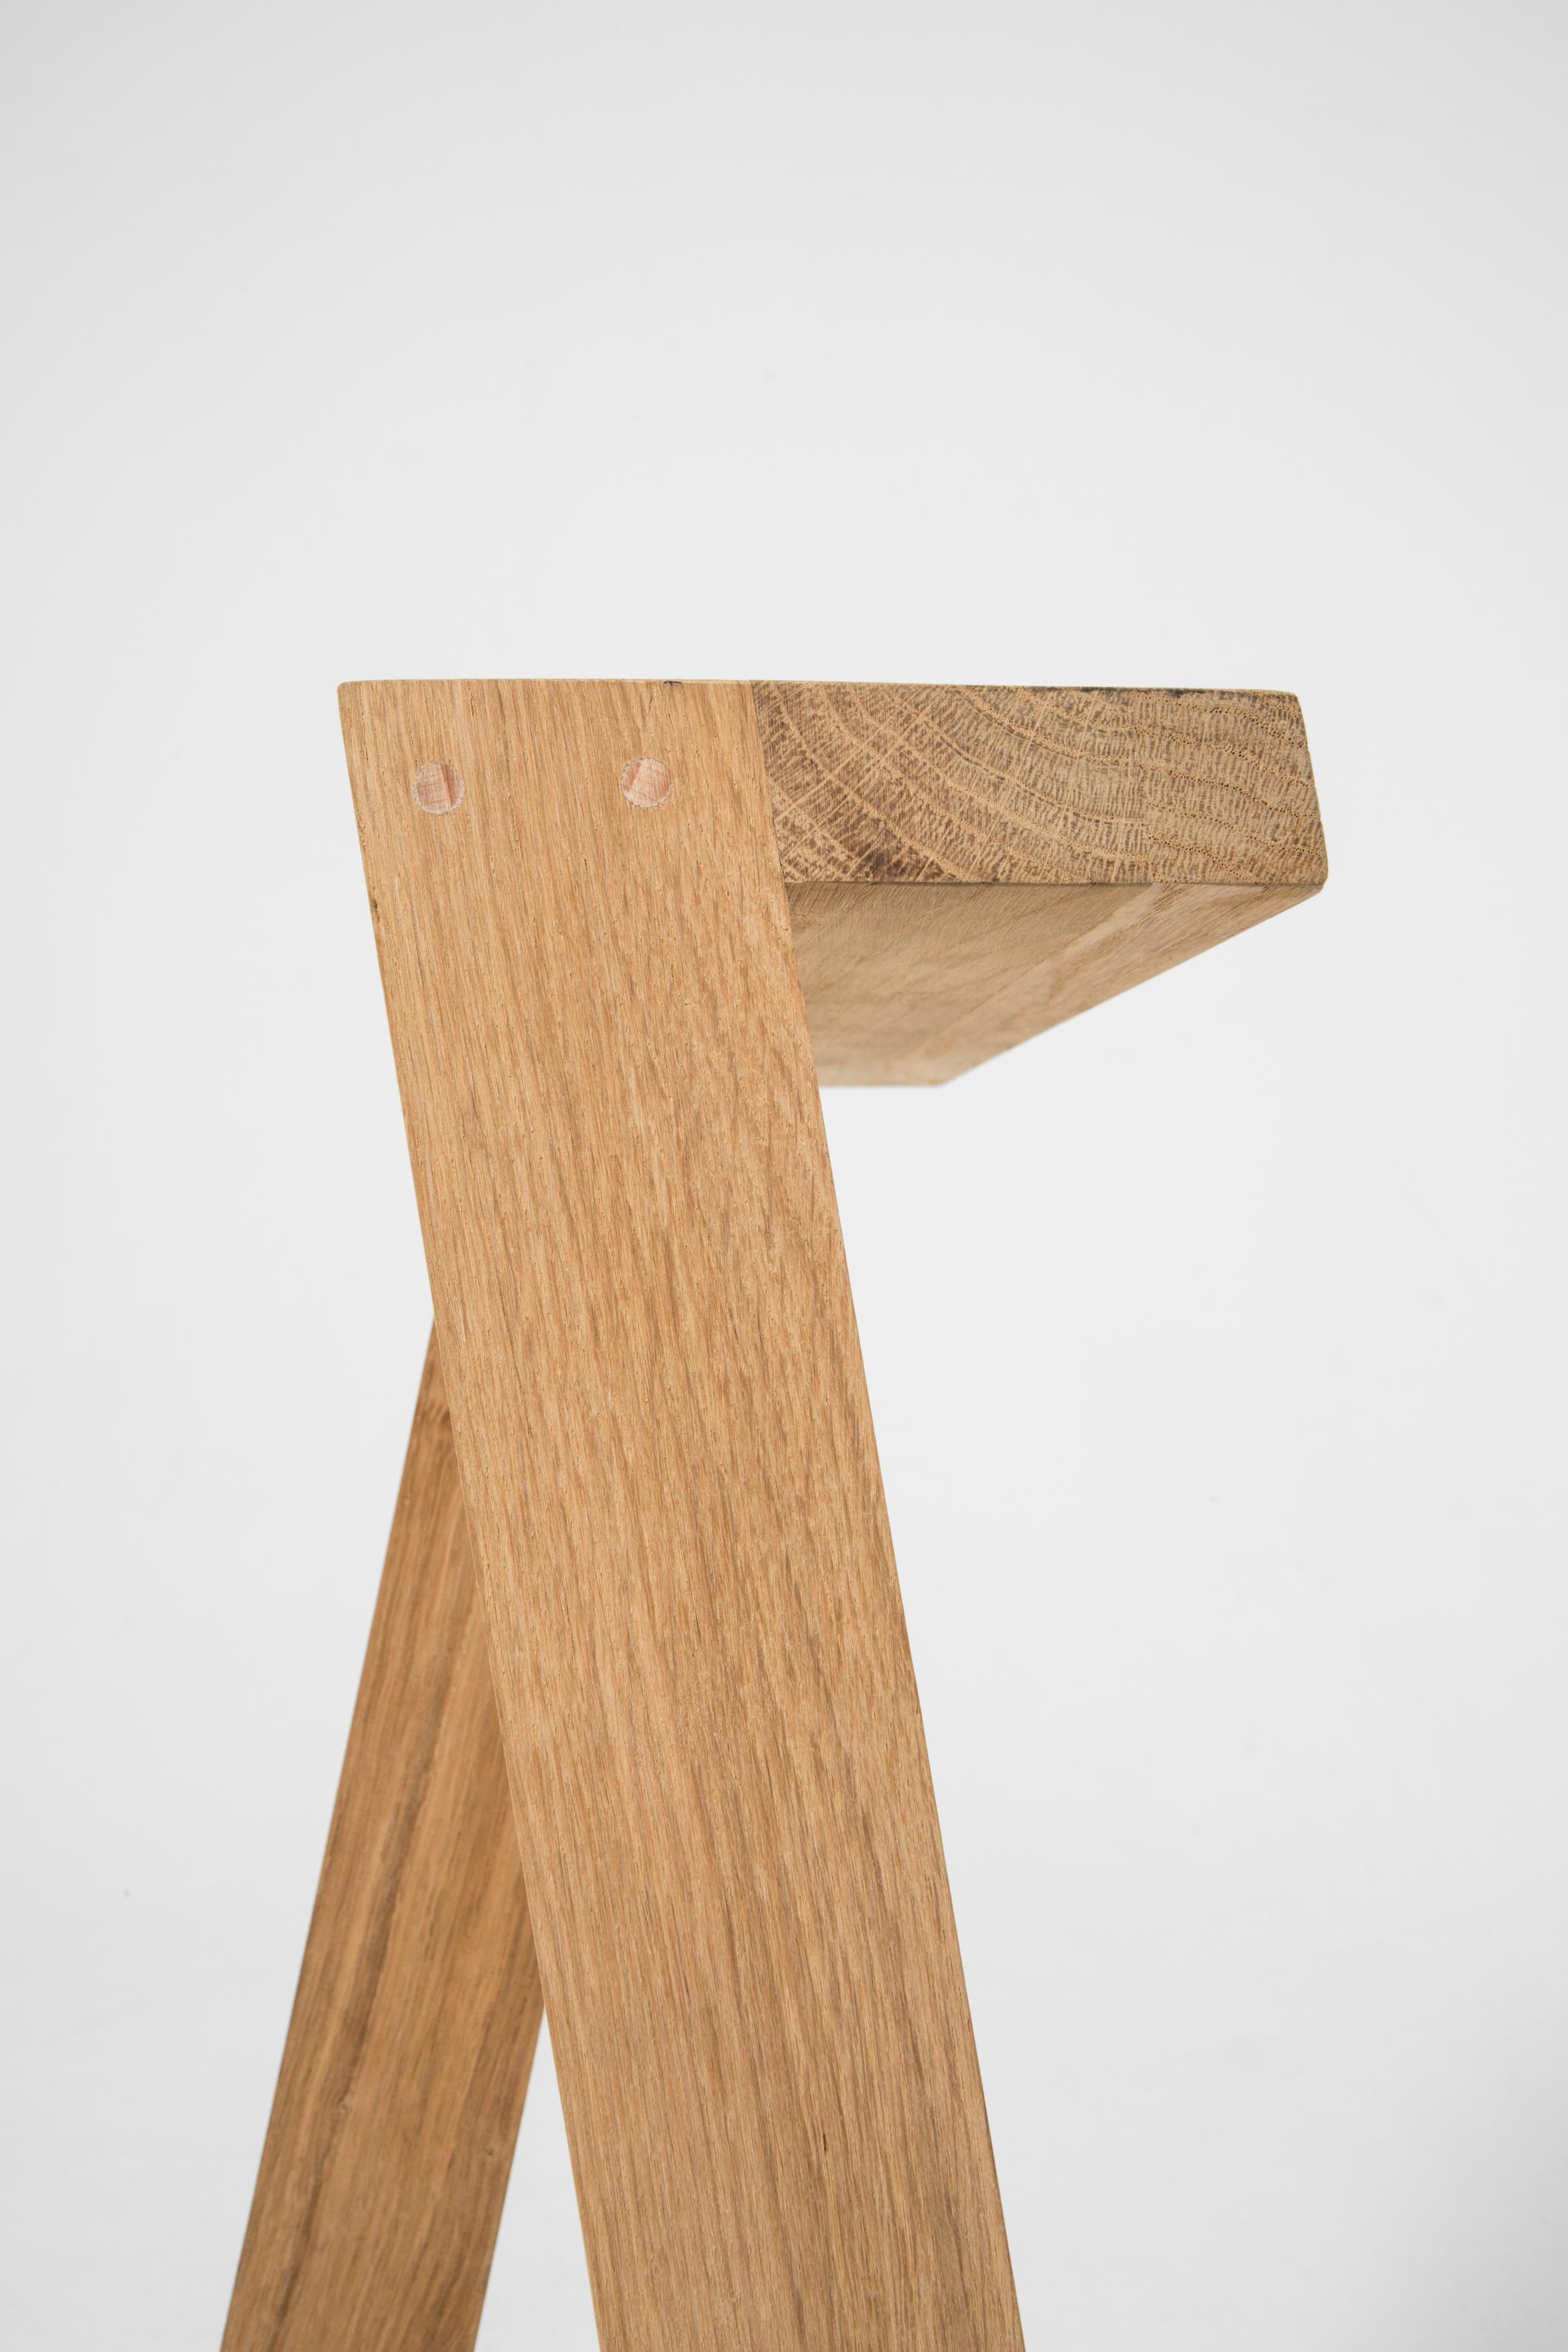 Set of 4 Small Pausa Oak Stool by Pierre-Emmanuel Vandeputte In New Condition For Sale In Geneve, CH